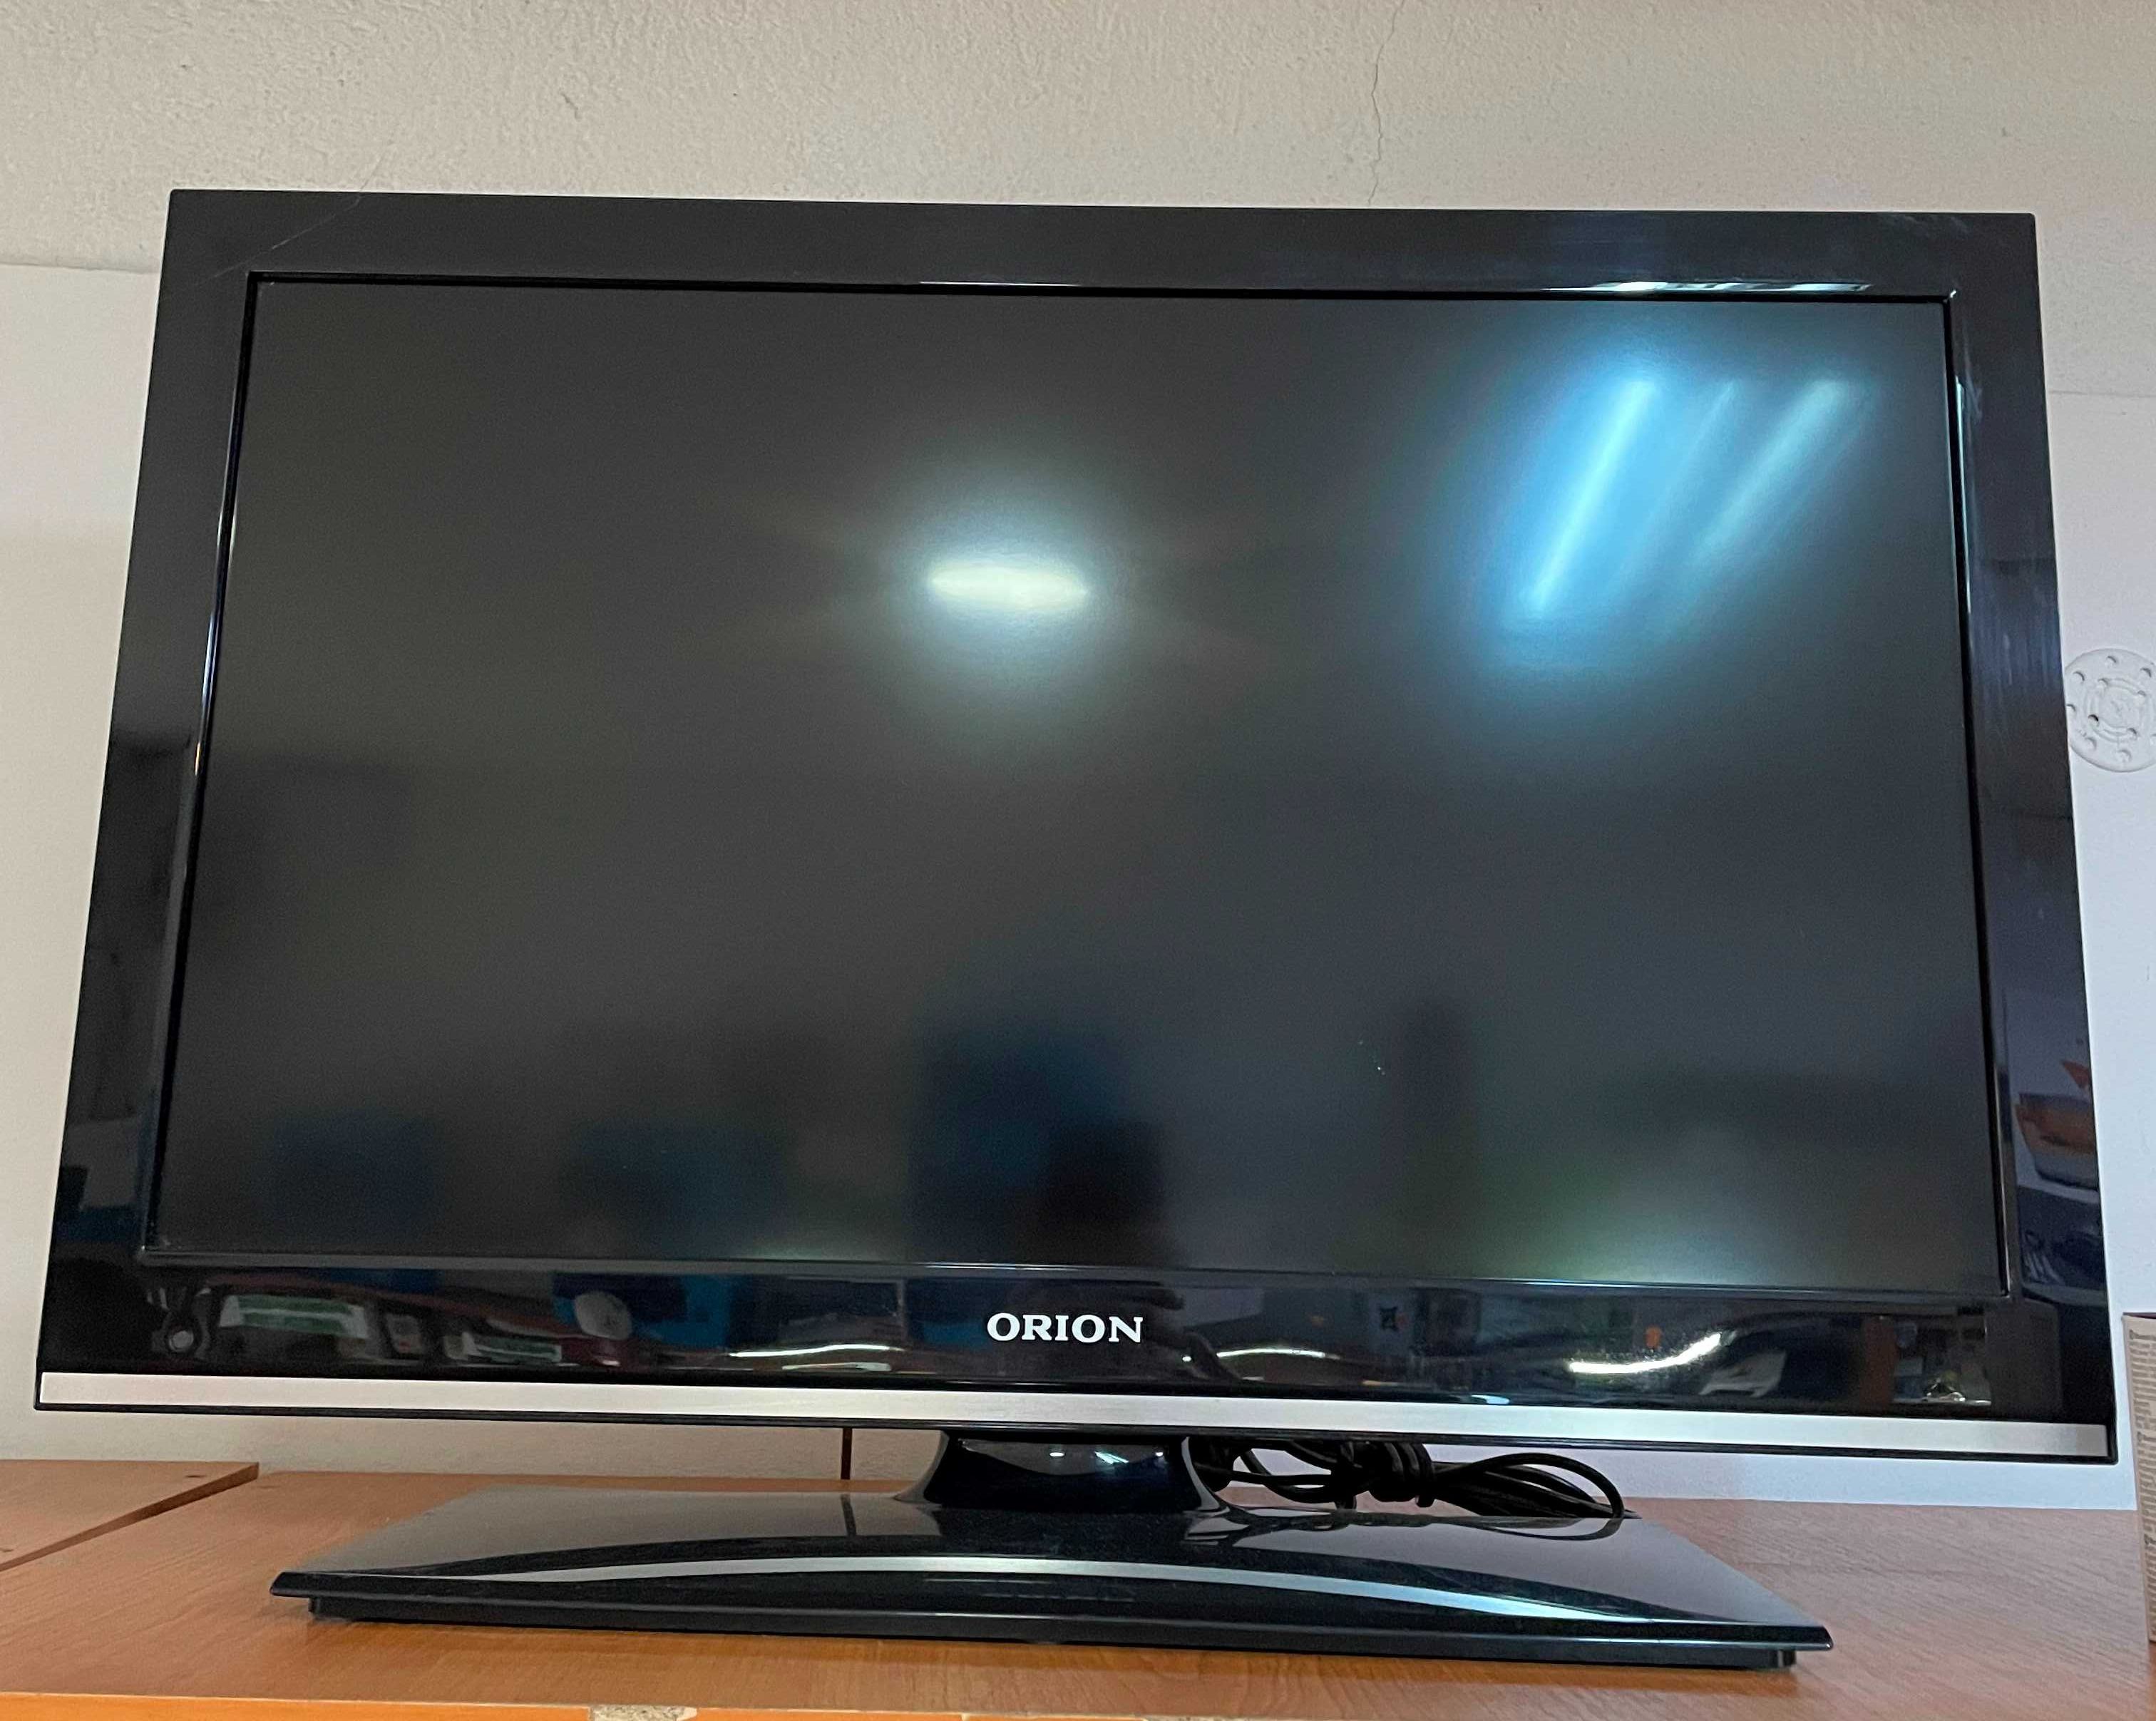 Vand tv led 26 inch Orion